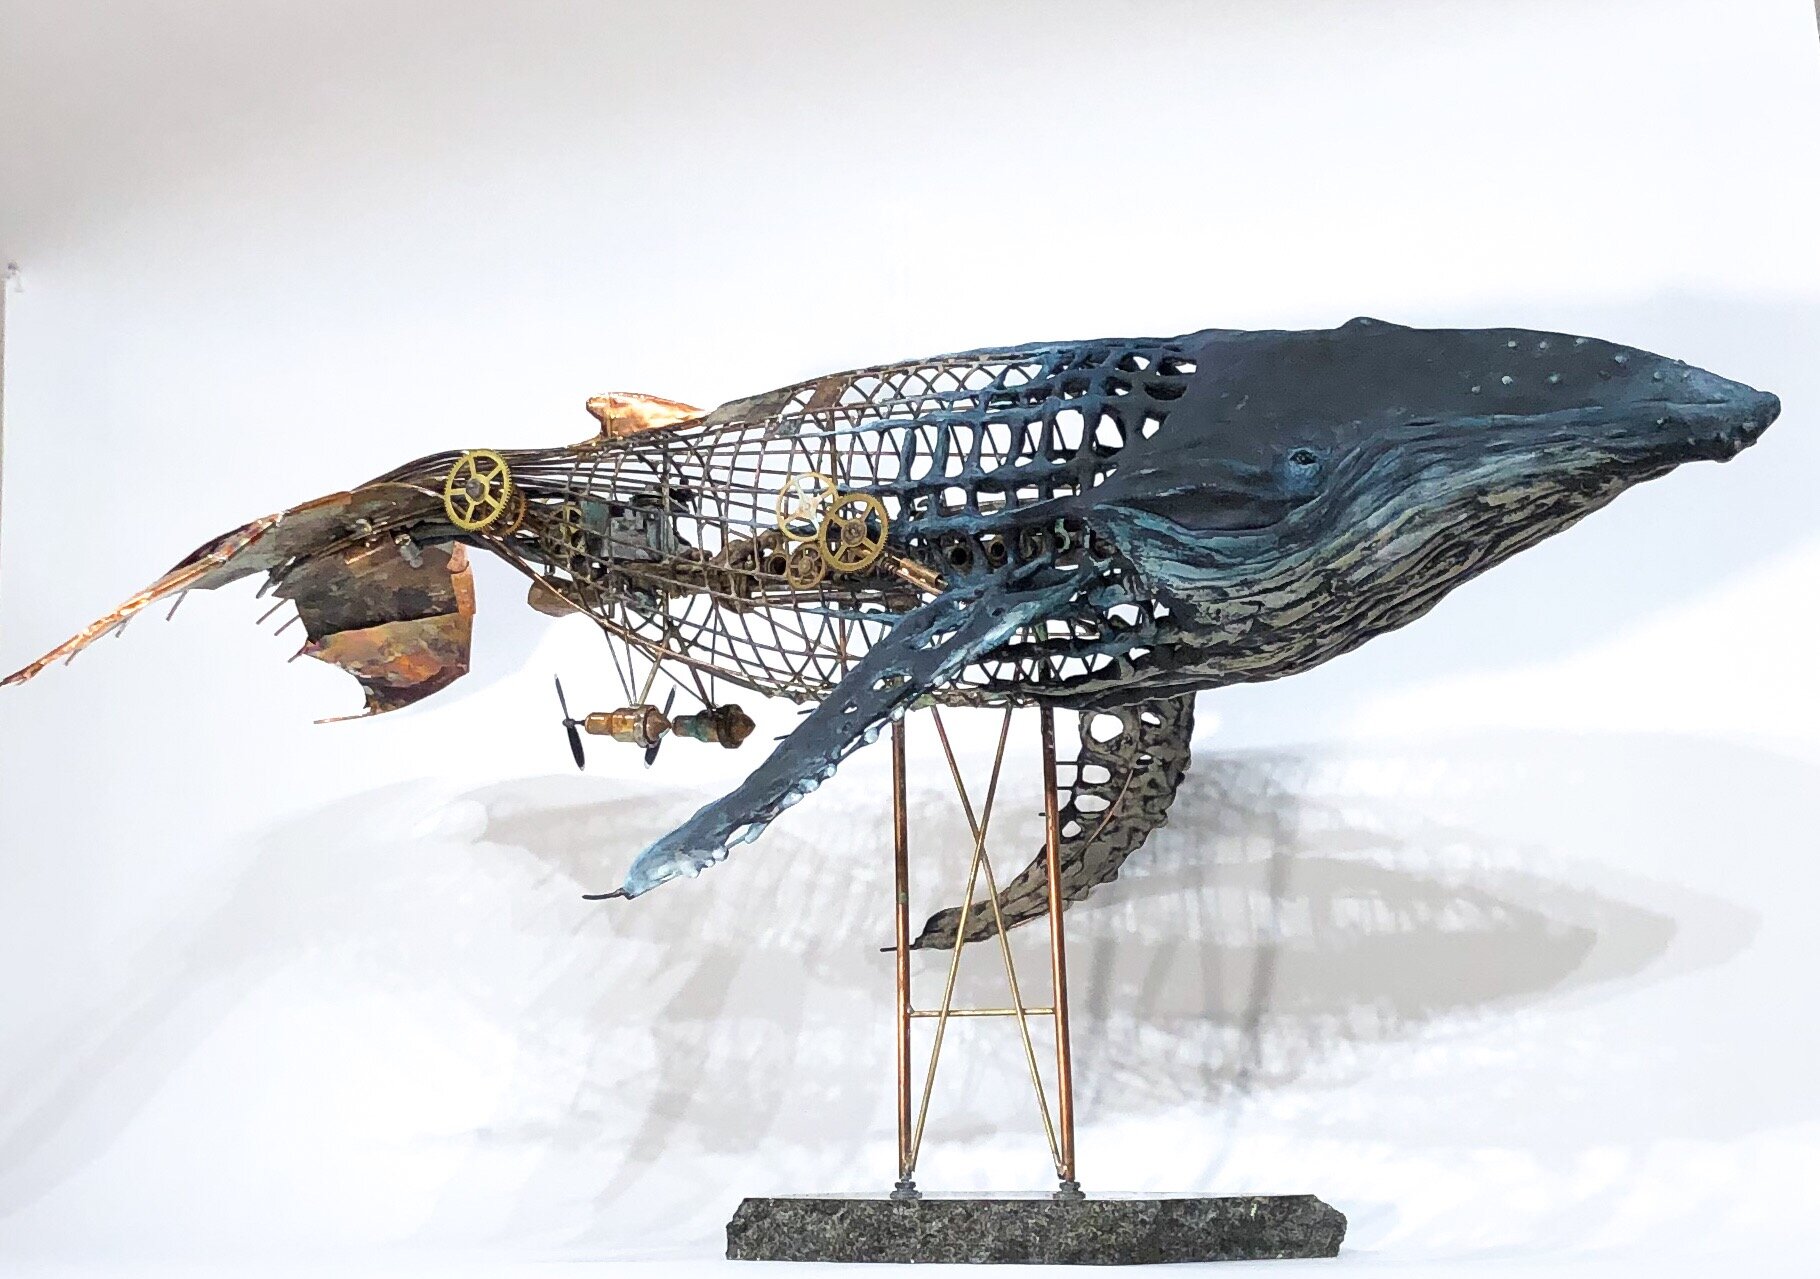    Adrift  , 30” x 6” x 18”, found objects and clay 